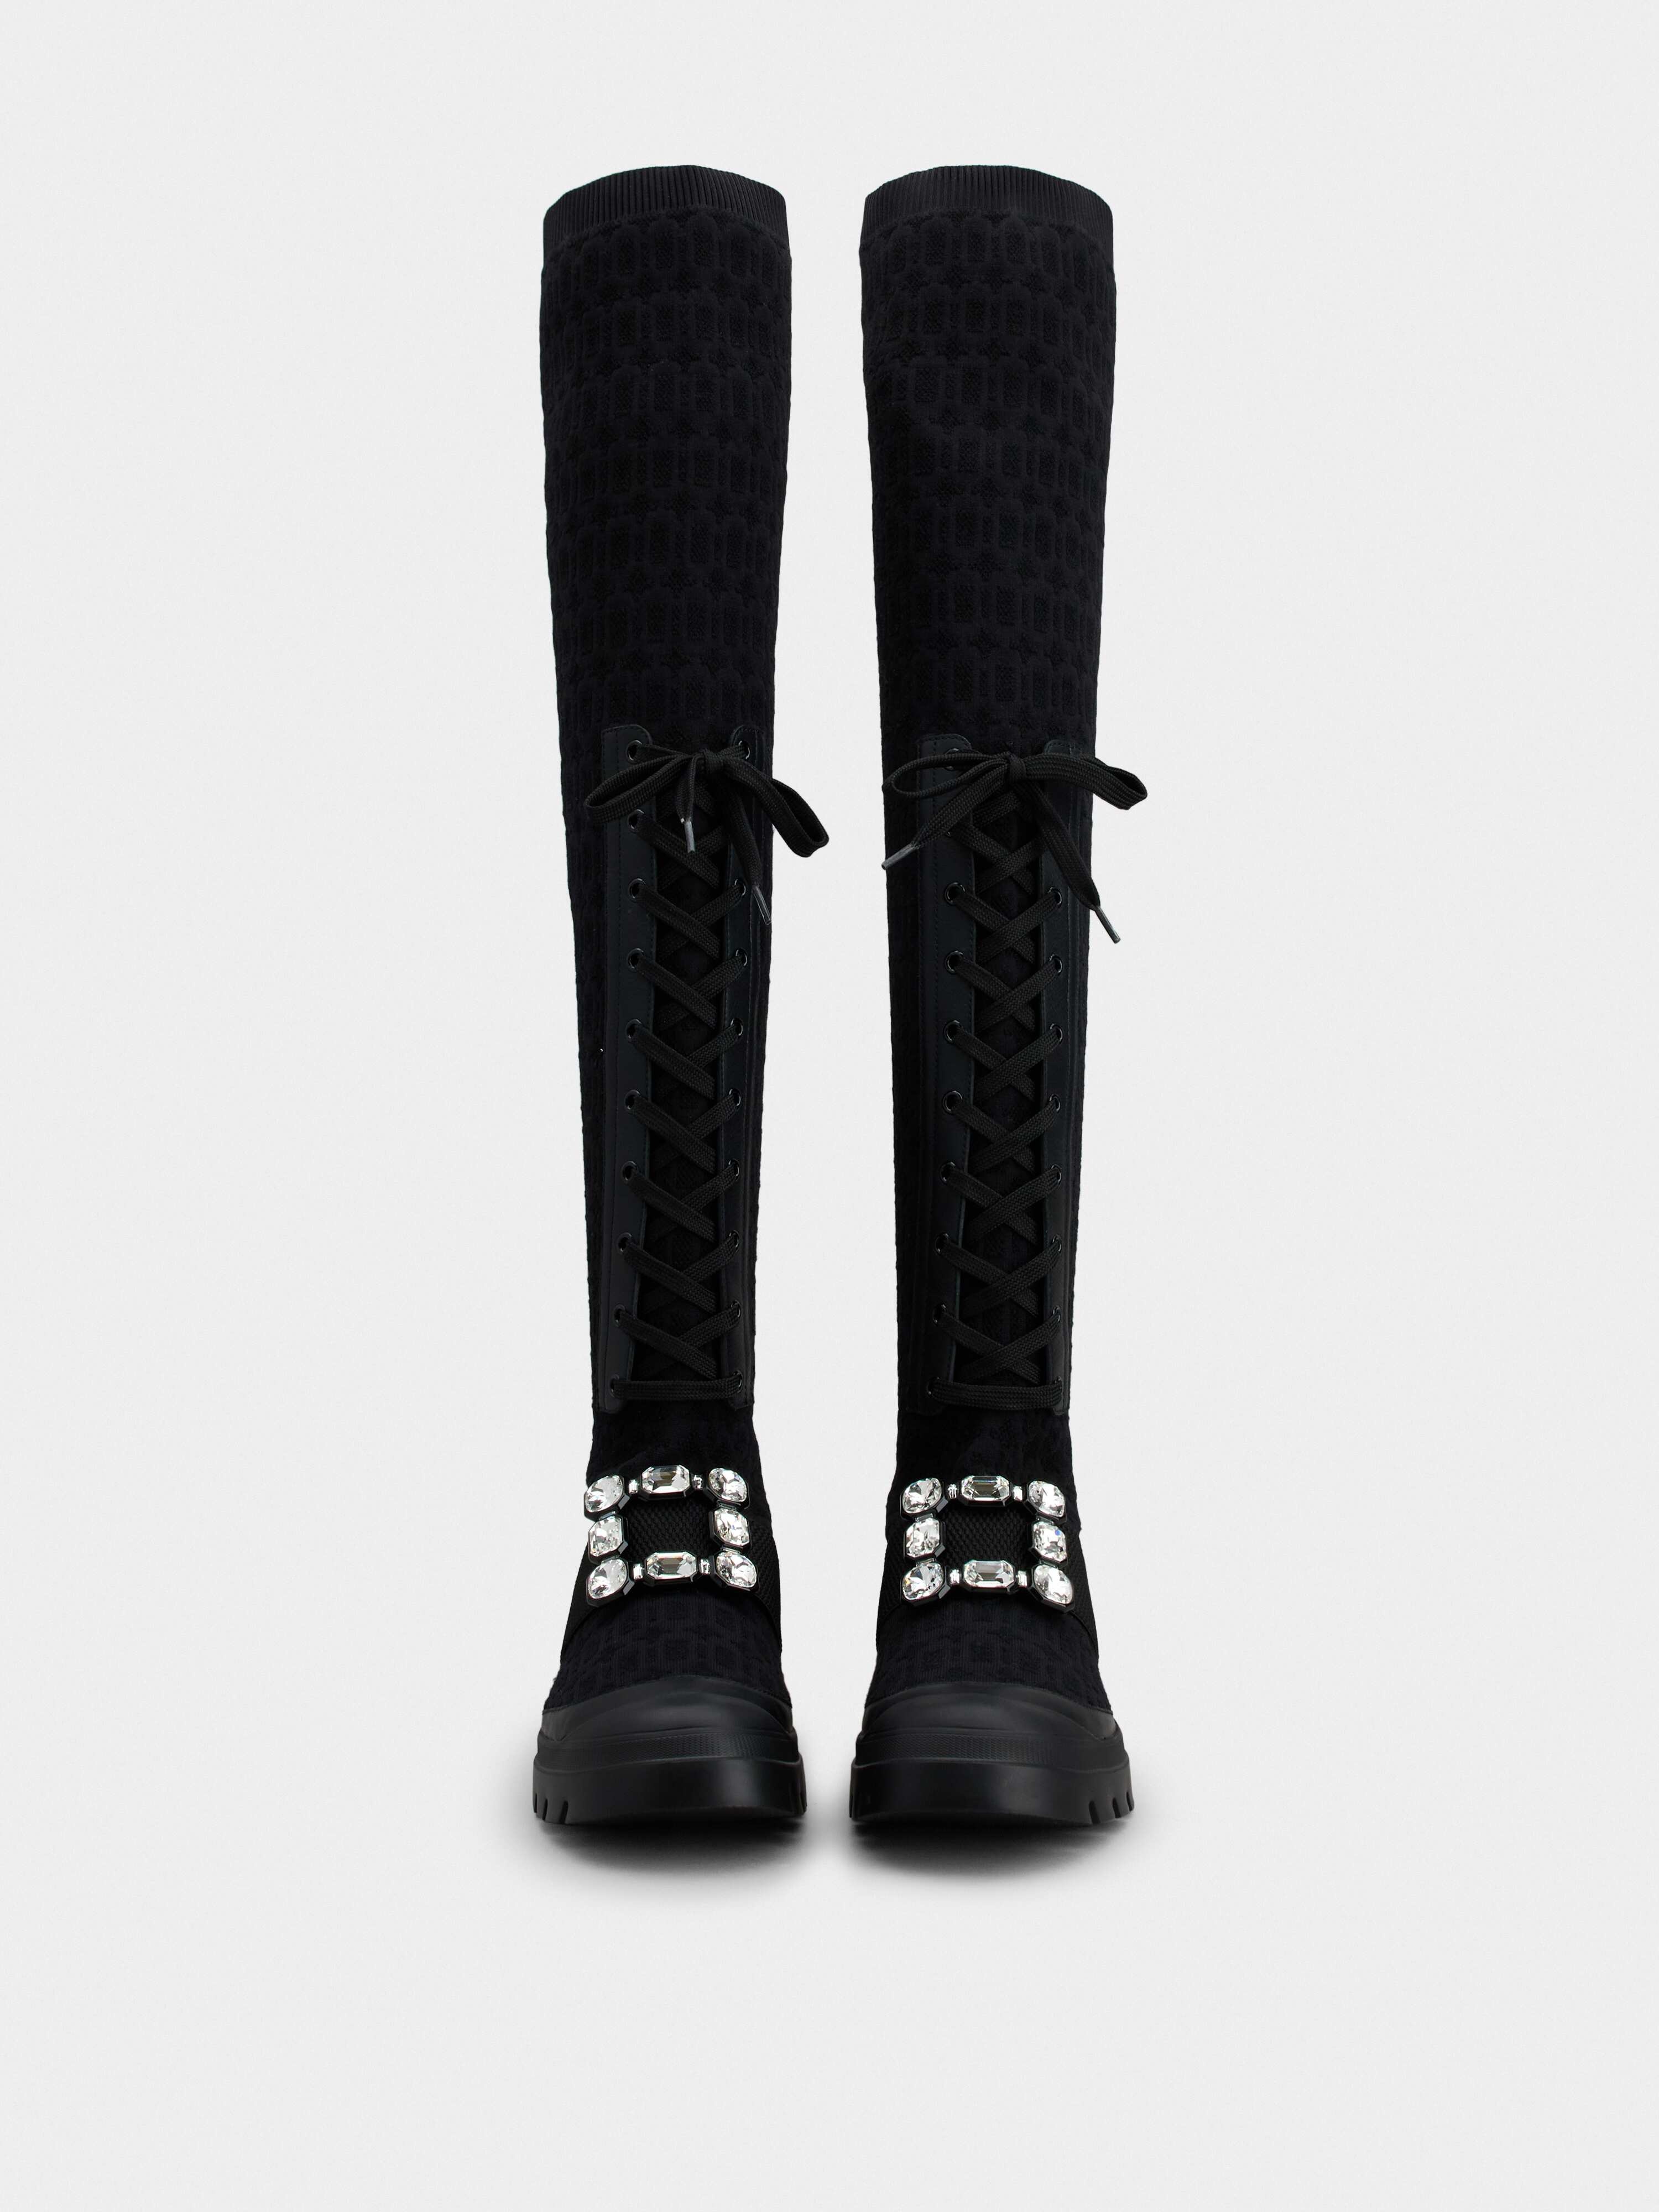 Walky Viv' Strass Buckle Socks Boots in Fabric and Leather - 4